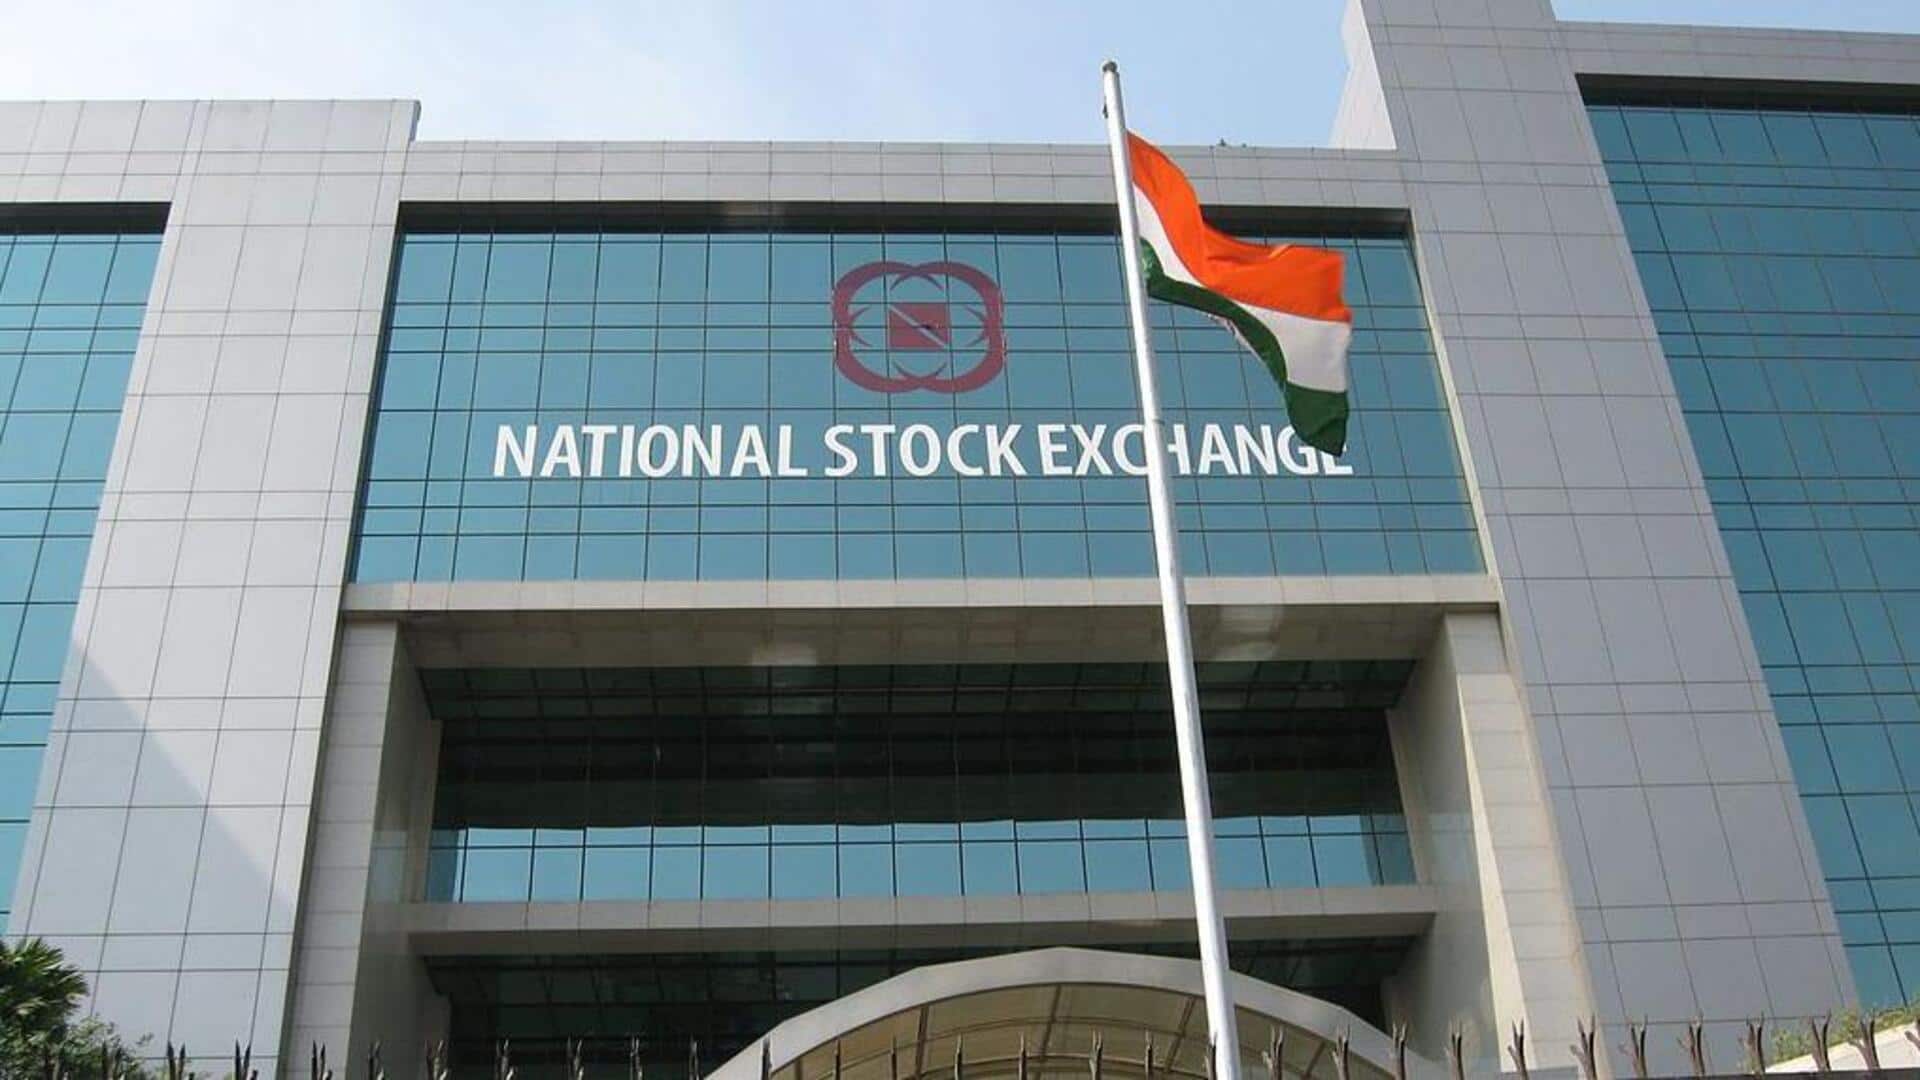 SGX Nifty Contracts to Shift to GIFT Nifty on the New NSE IX - Equitypandit